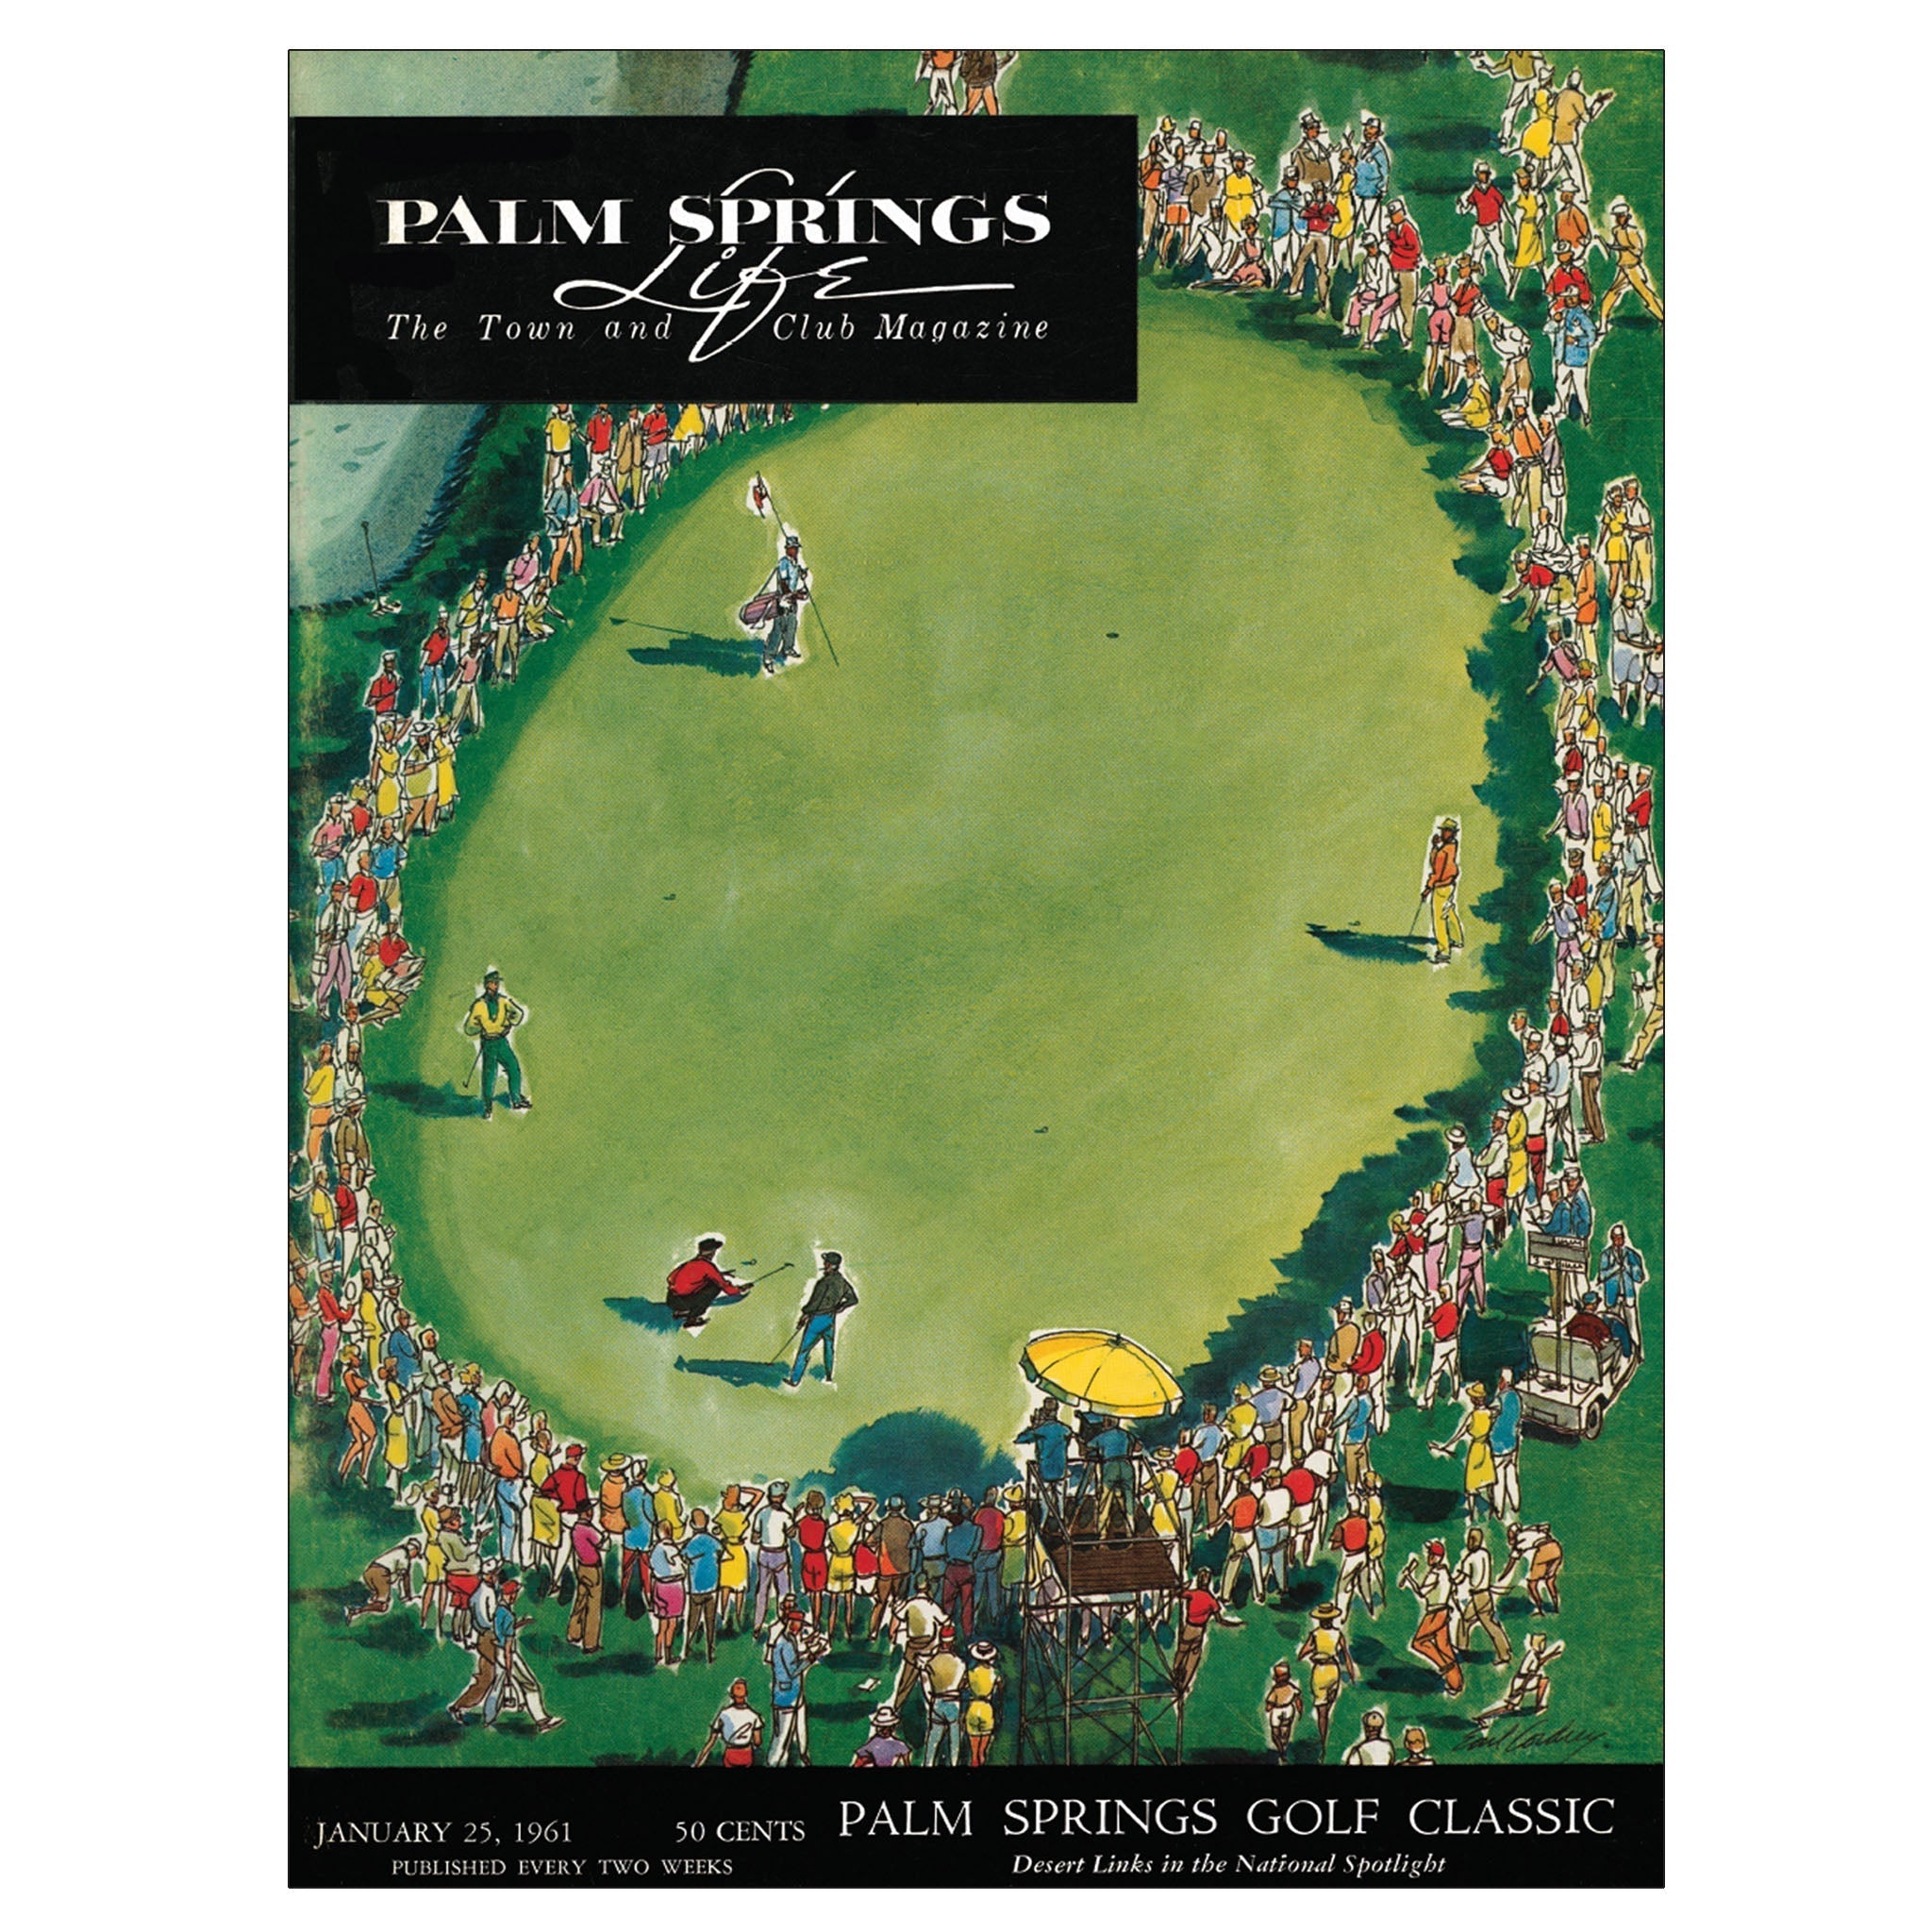 Palm Springs Life - January 25 1961 - Cover Poster